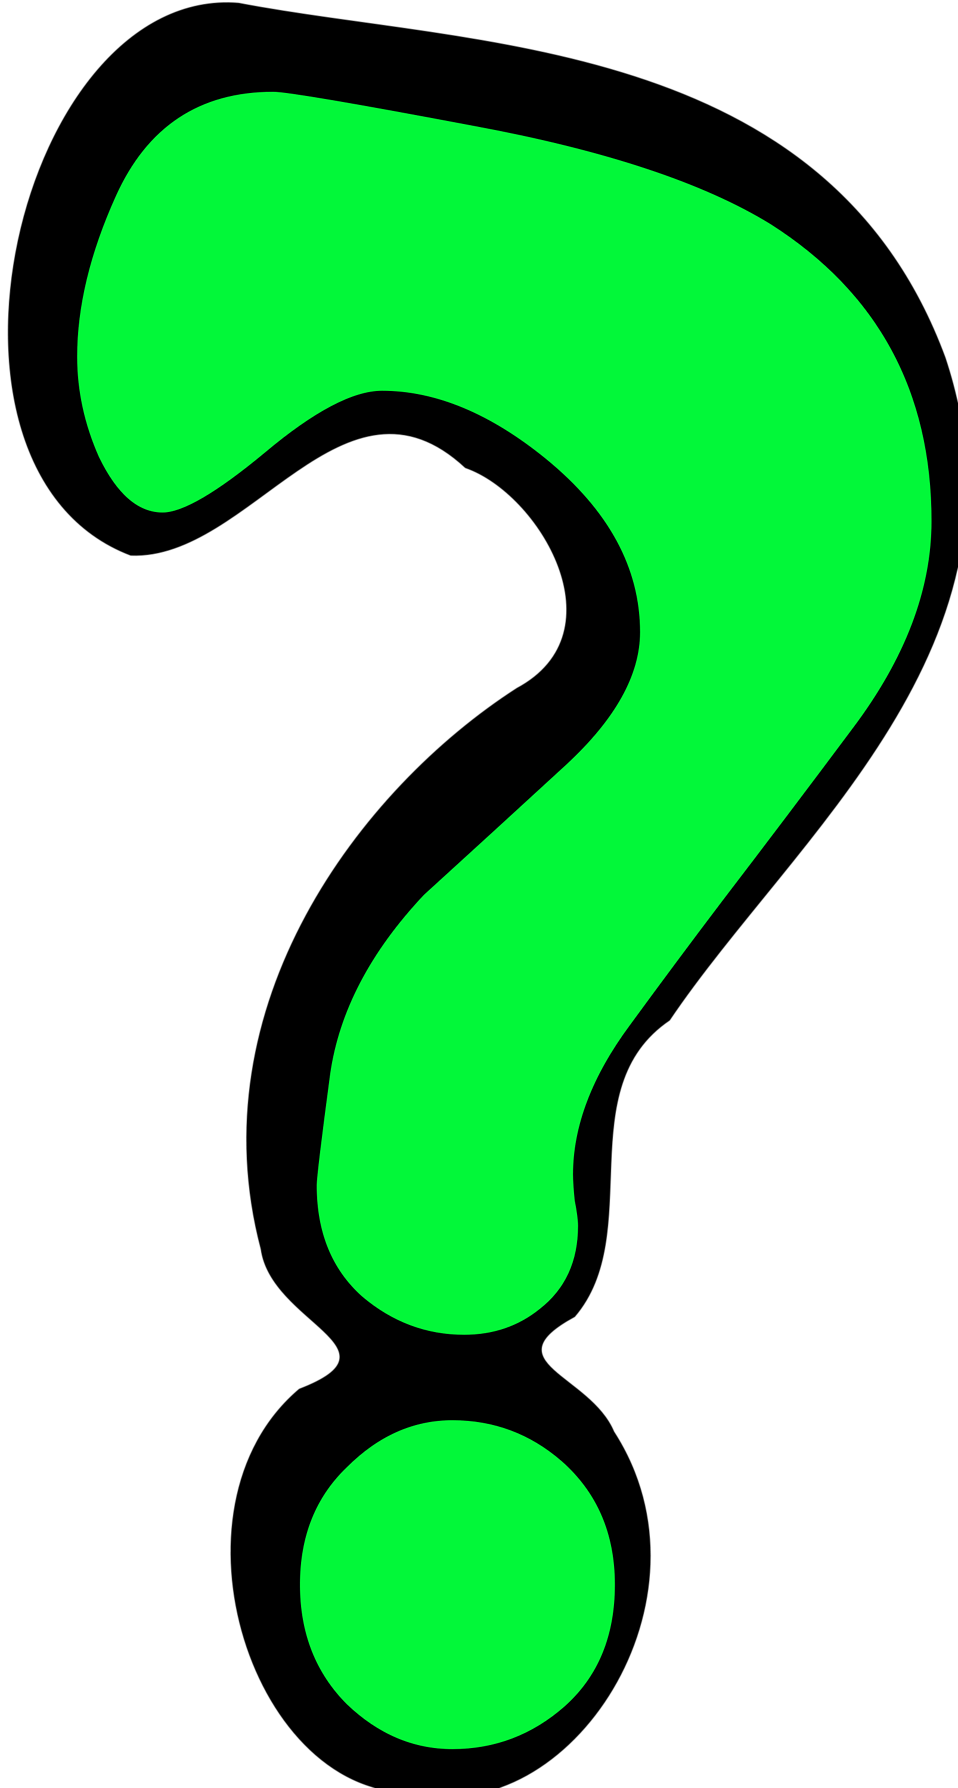 clipart picture of a question mark - photo #28